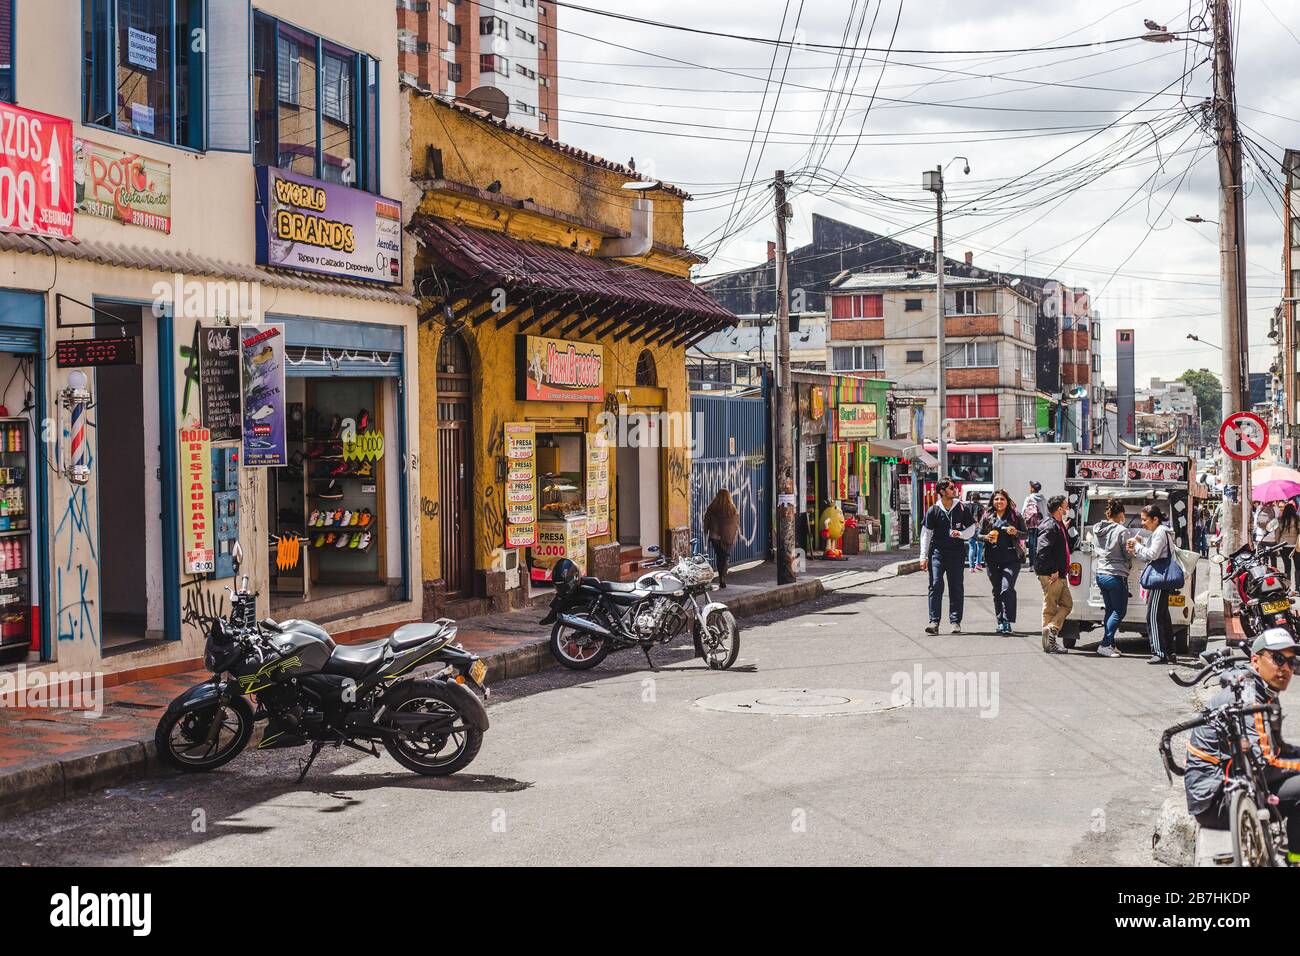 Typical street in Chapinero Central barrio of Bogota, Colombia. Small colorful shopfronts, parked motorbikes and pedestrians buying street food Stock Photo